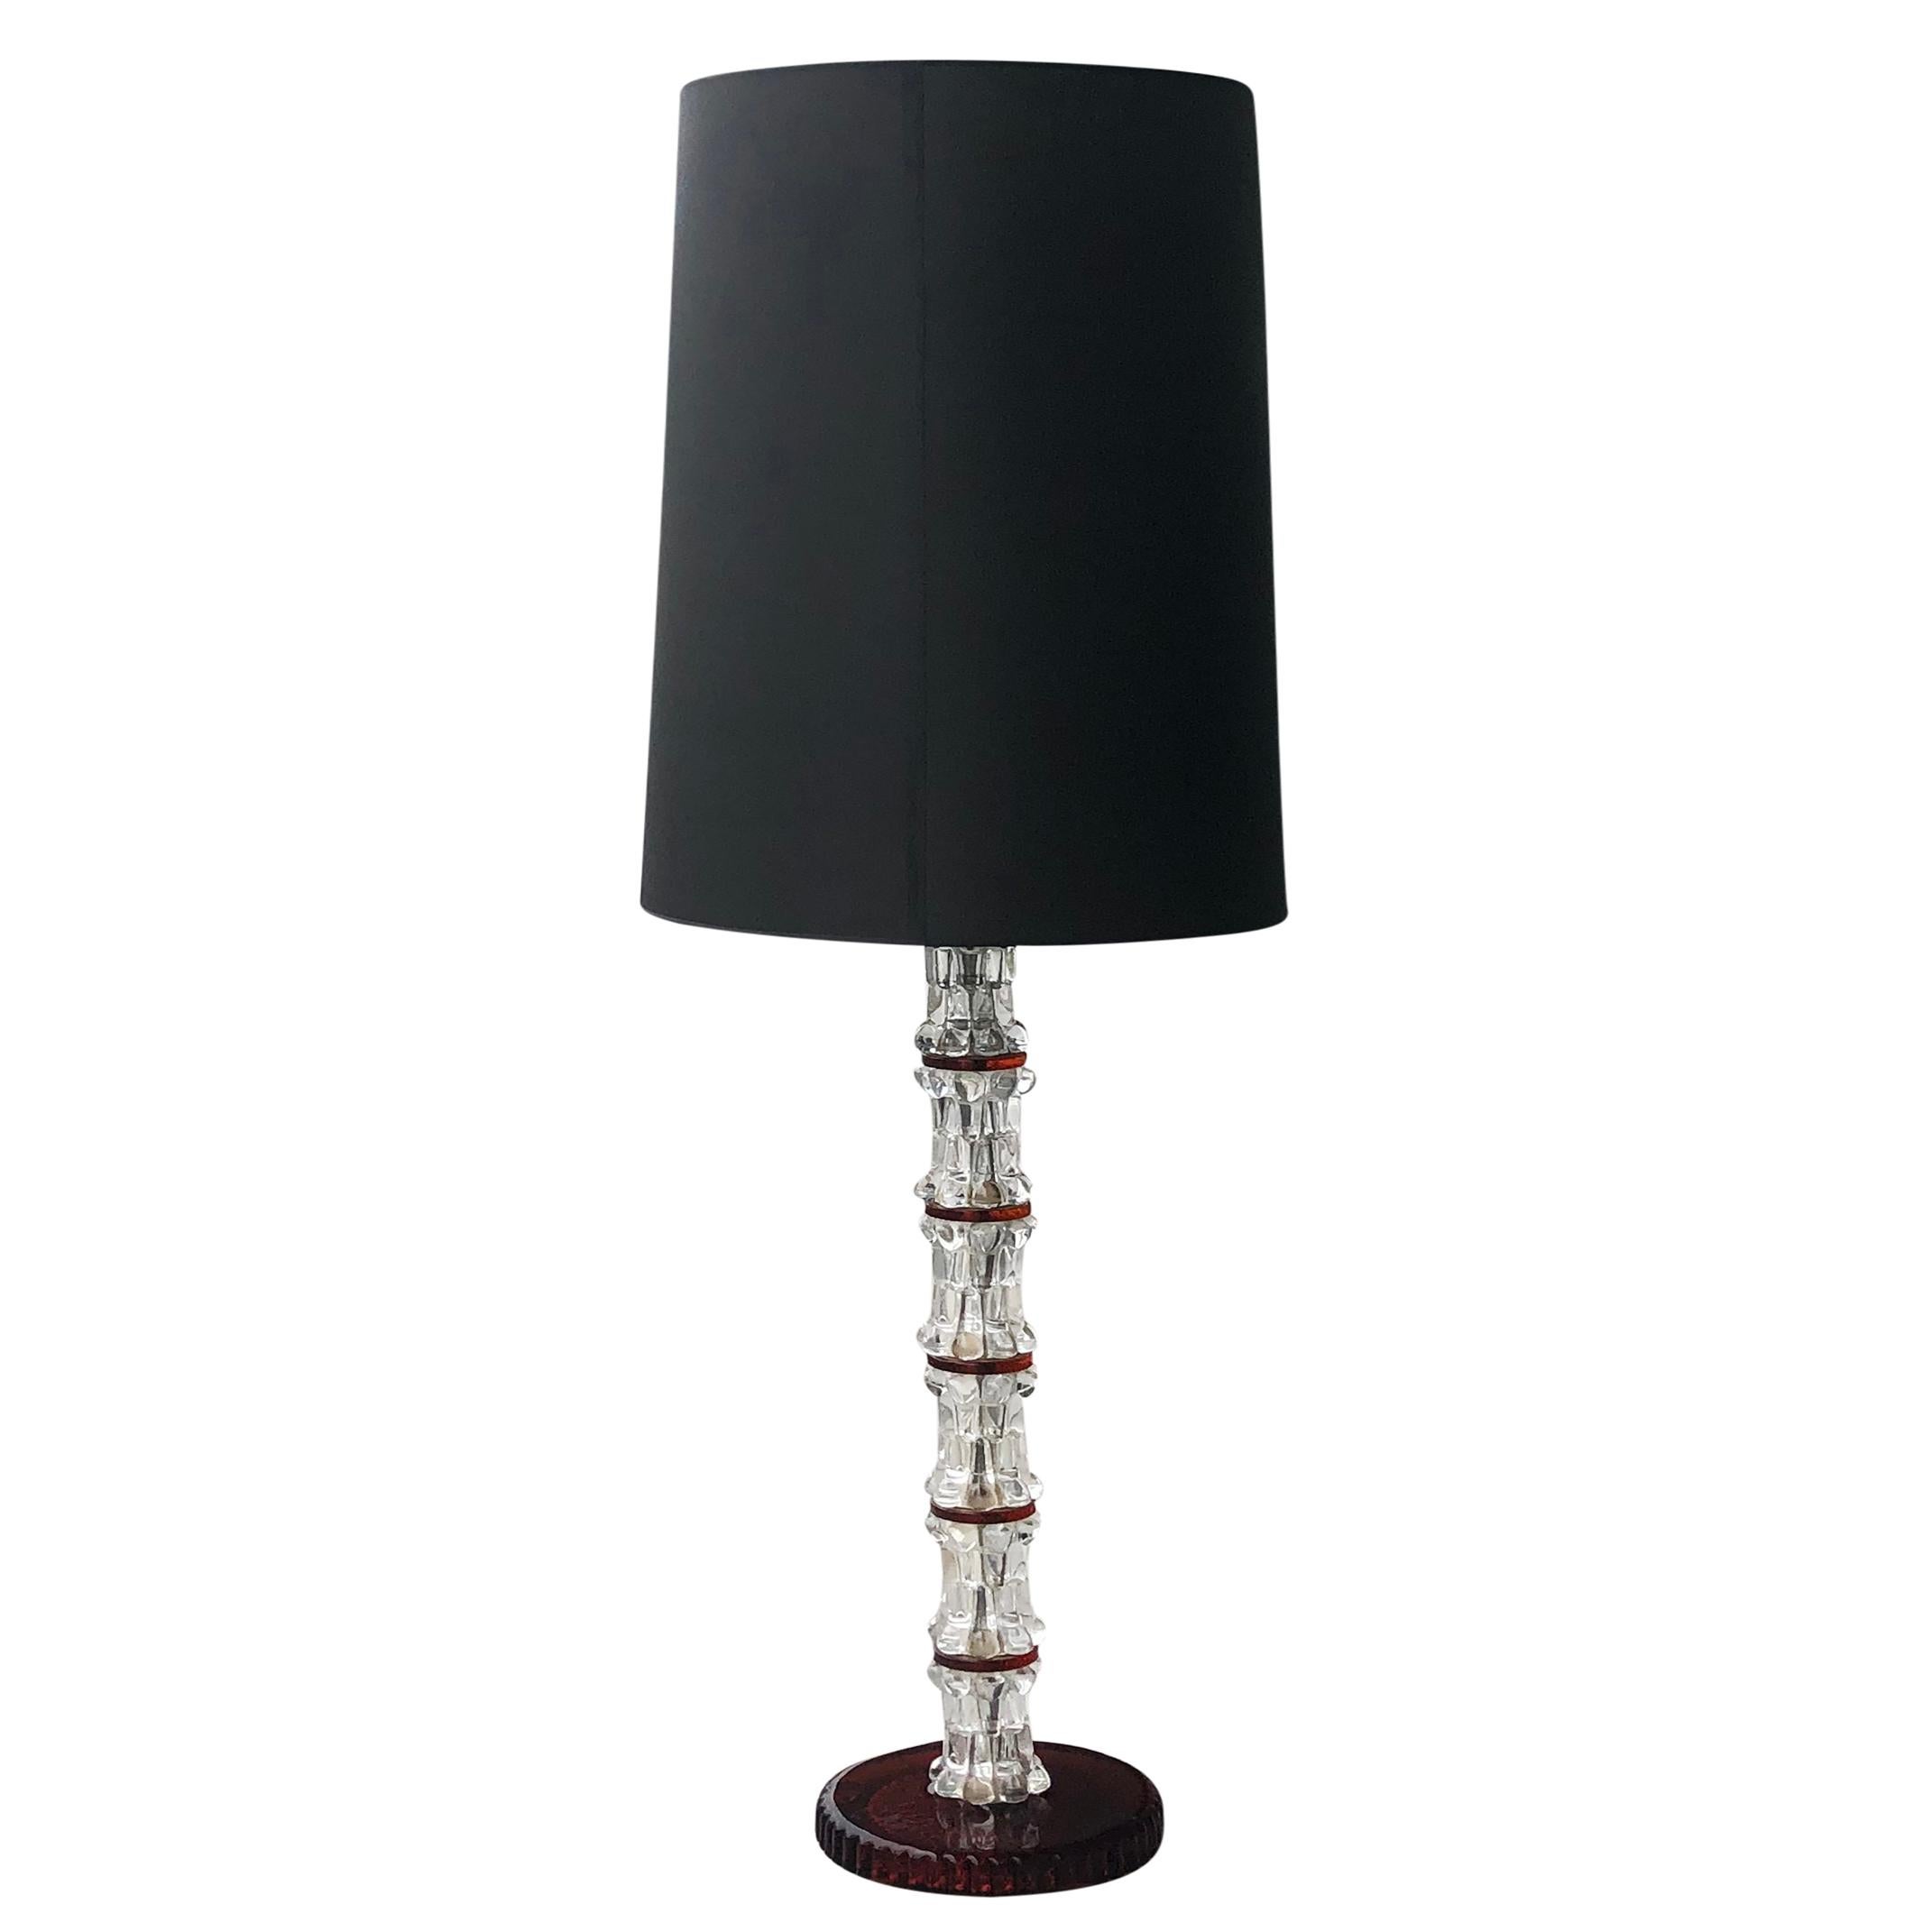 A white-red, vintage Mid-Century modern Swedish floor lamp made of hand blown stacked crystal, Orrefors glass with a tall black shade. The Scandinavian light was designed by Carl Fagerlund and produced by Orrefors, featuring a one light socket in